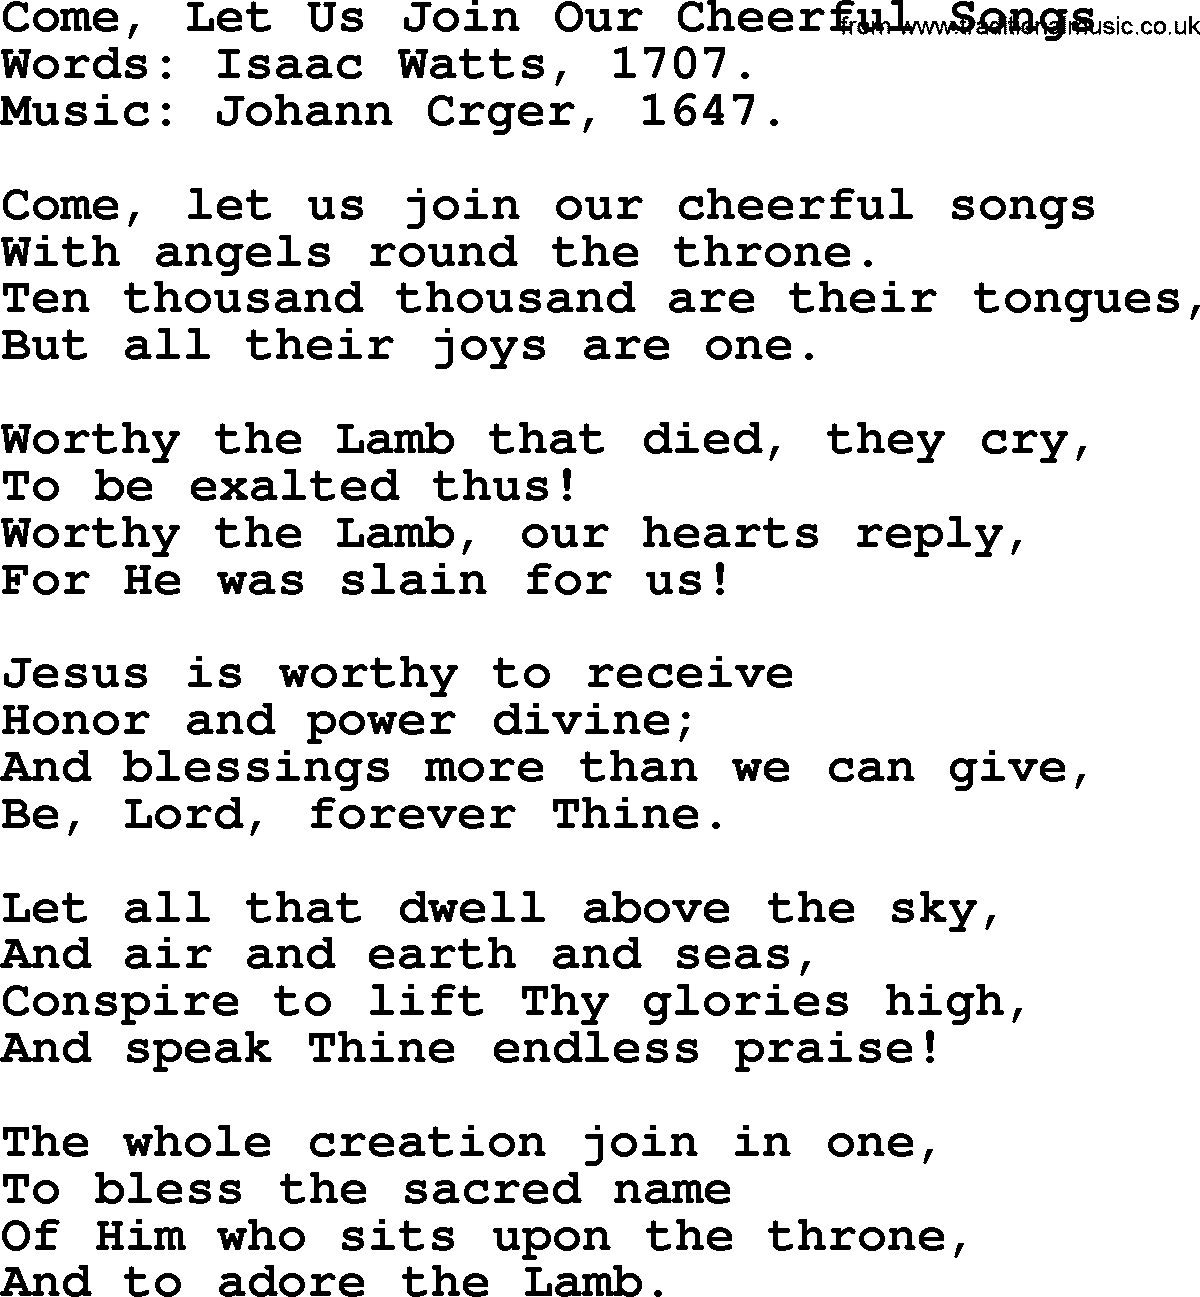 Isaac Watts Christian hymn: Come, Let Us Join Our Cheerful Songs- lyricss